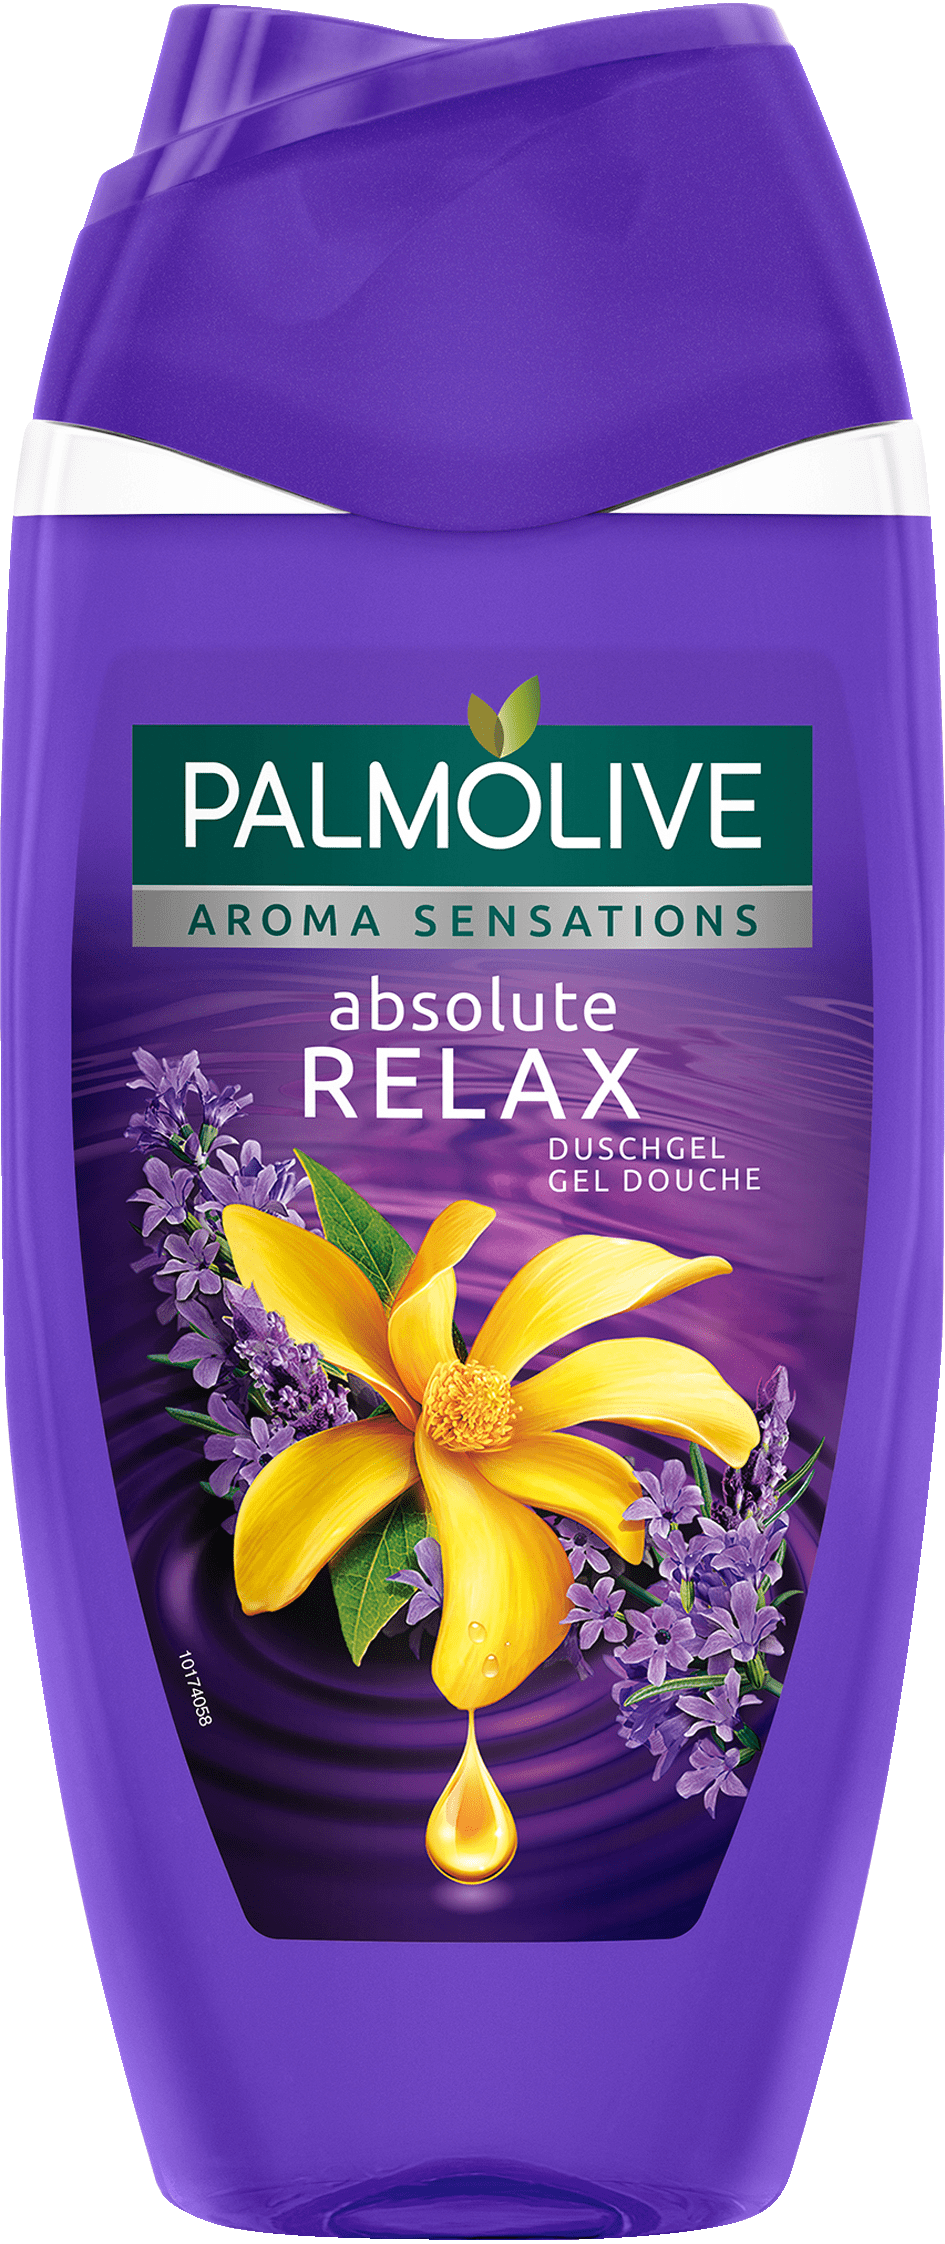 Honest Forwarder | Palmolive Shower Relax, Sensations Aroma 250 Ml Absolute Of Gel